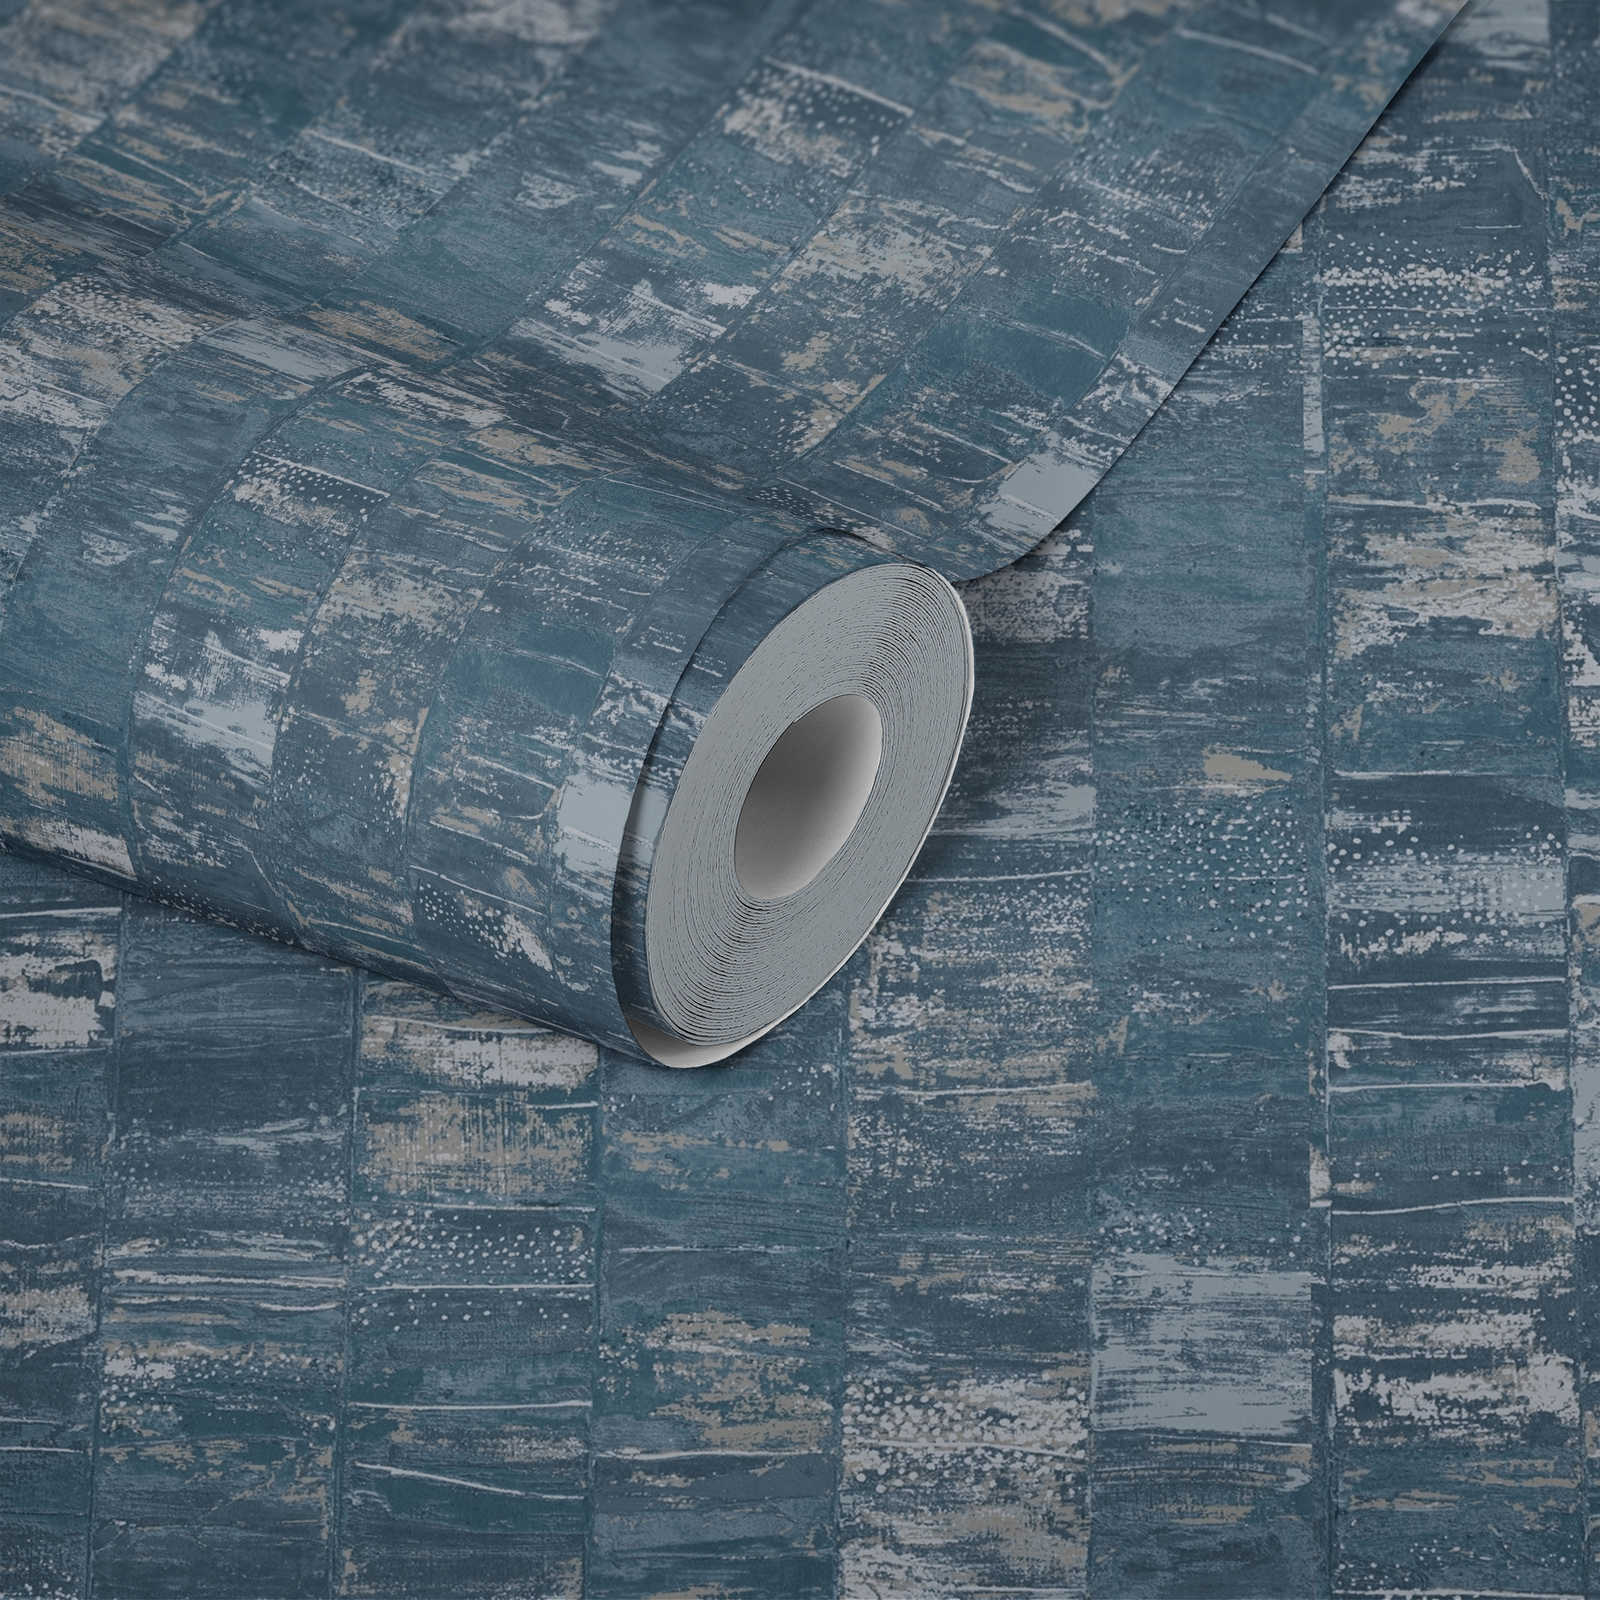             Non-woven wallpaper petrol-coloured with structure design in used look - blue, grey
        